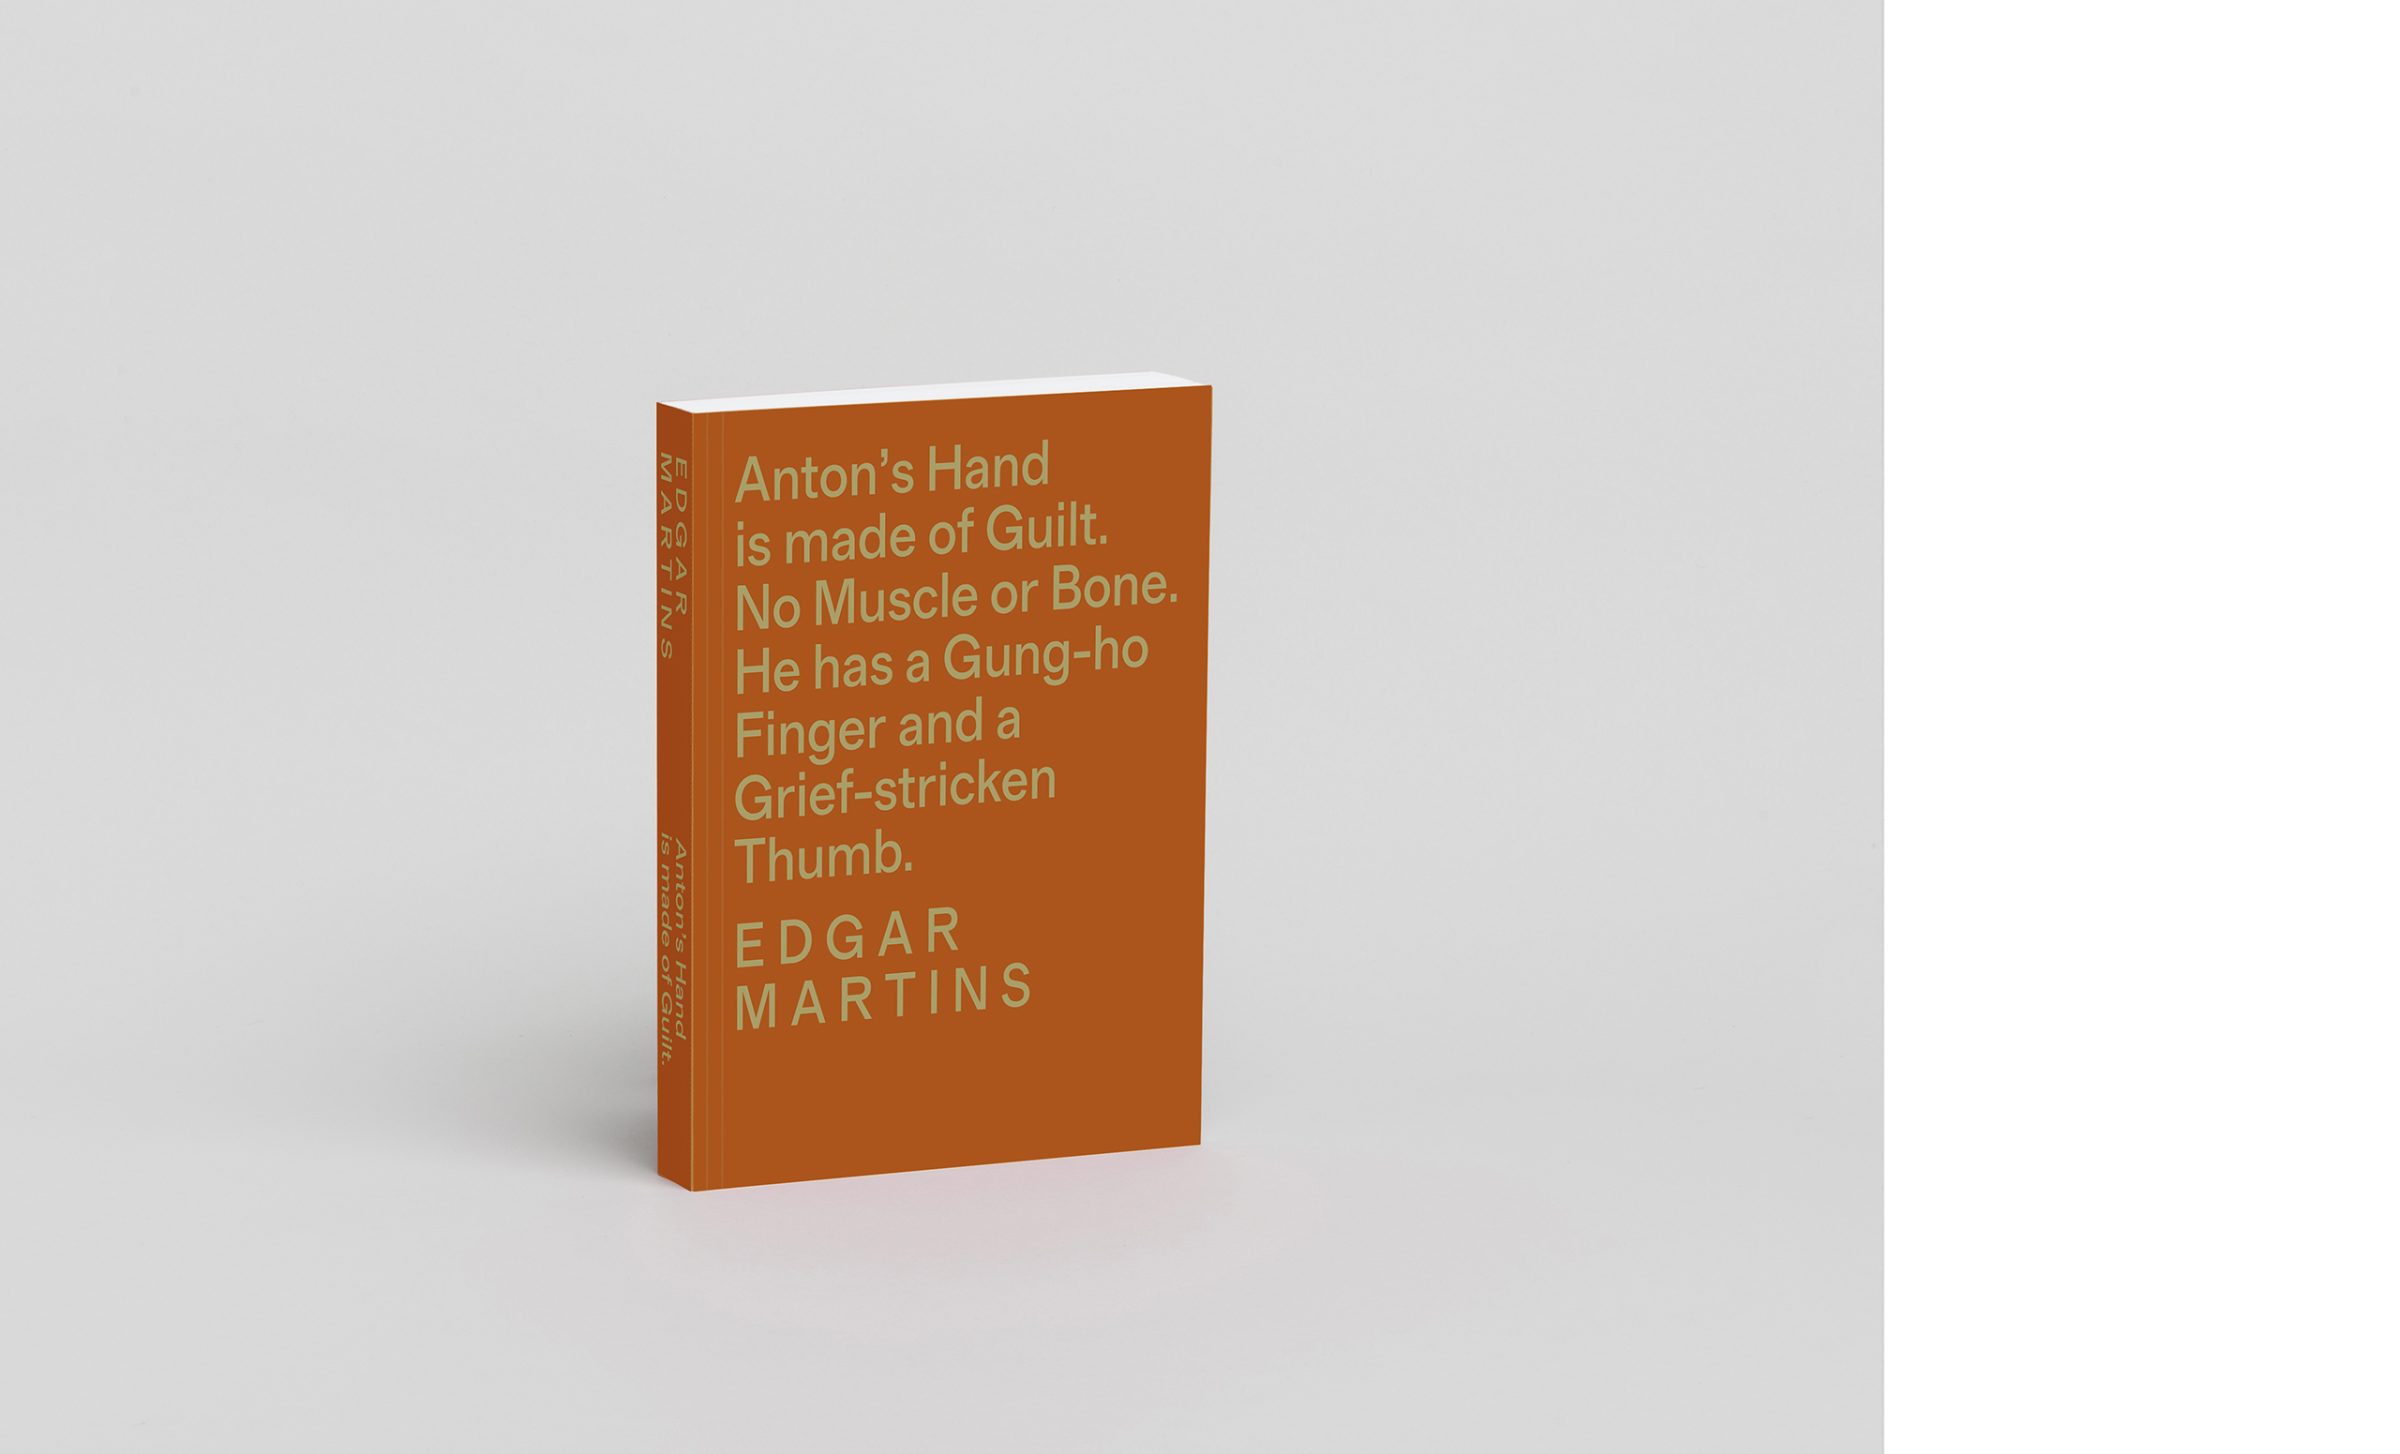 'Anton's Hand is Made of Guilt. No Muscle or Bone. He has a Gung-ho Finger and a Grief-stricken Thumb.' is now available to order